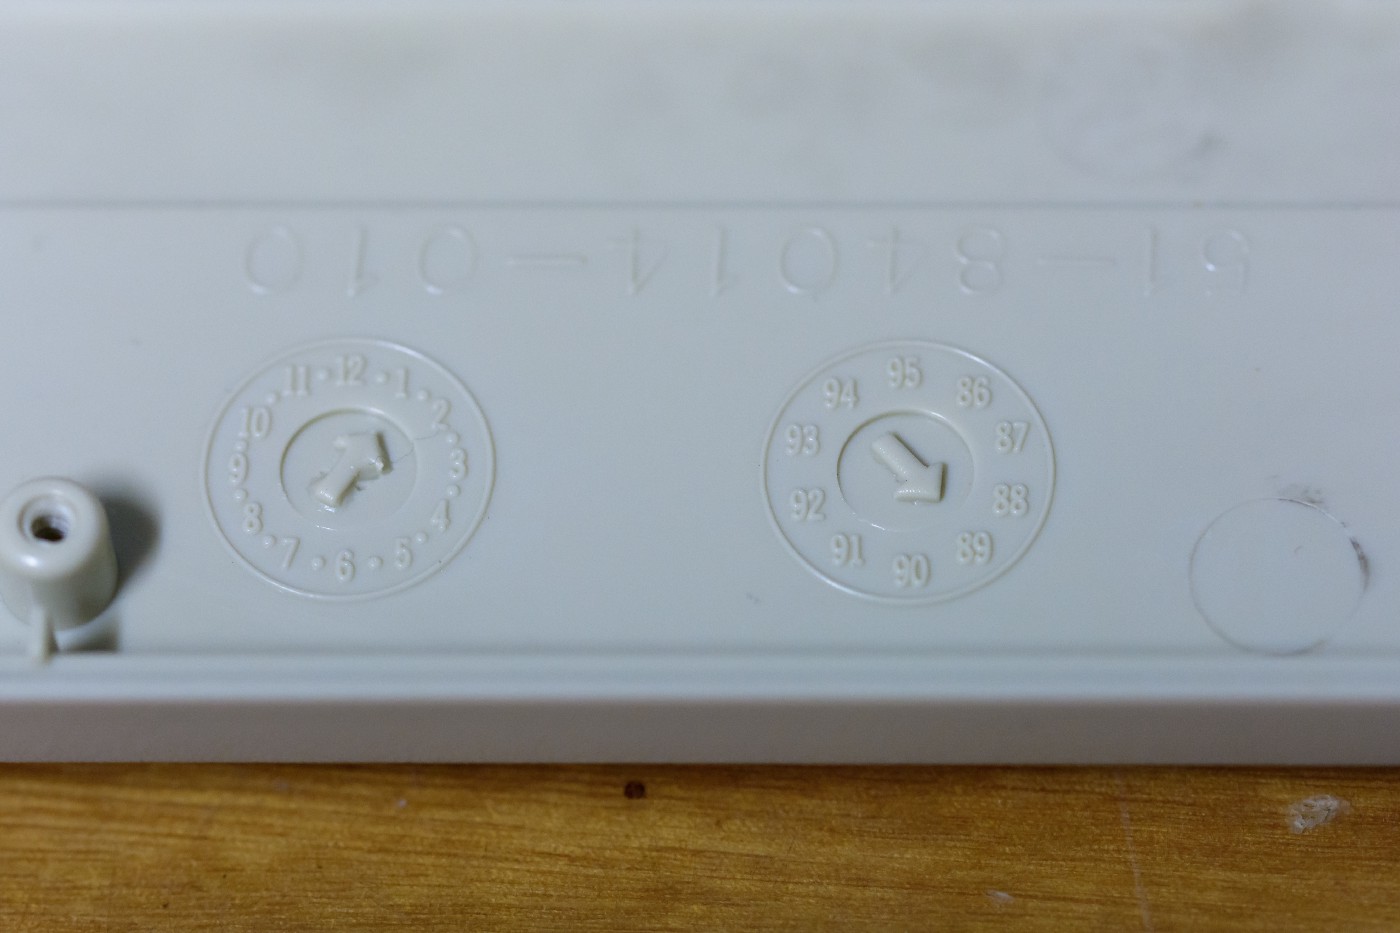 A close up image of two moulded plastic dials, which indicate when the keyboard was manufactured. They indicate January of 1989